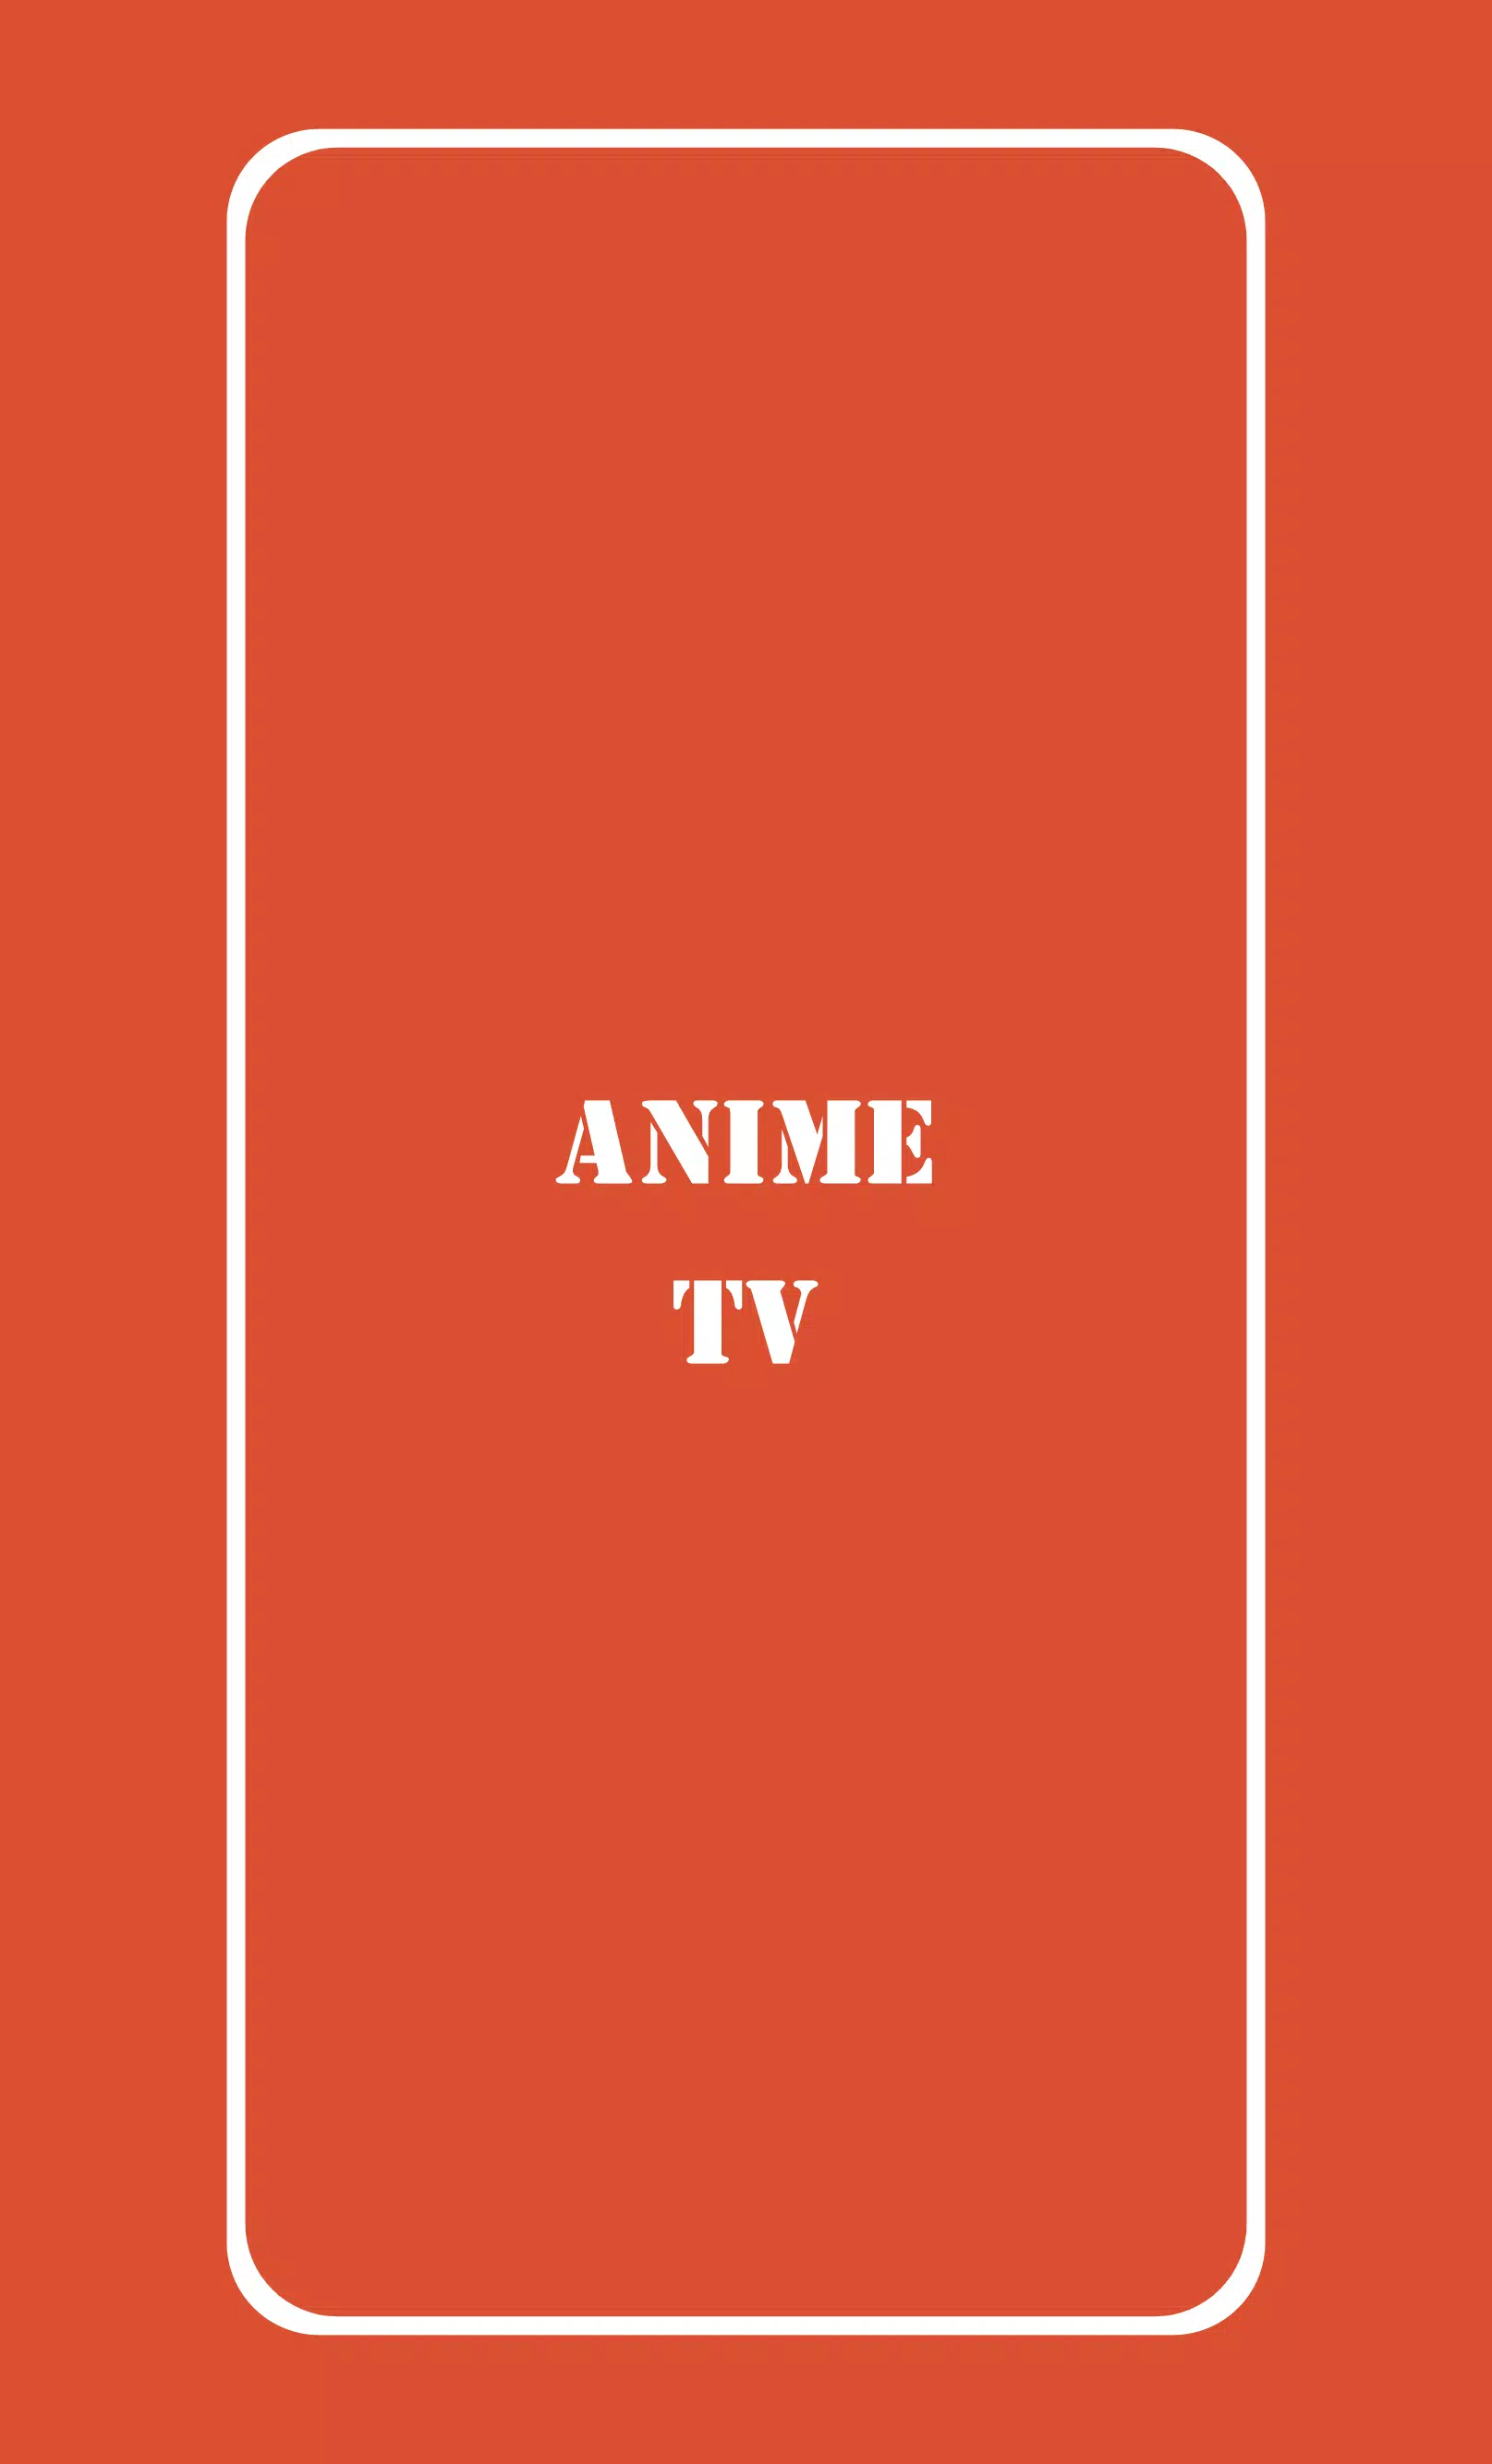 About: Anime TV - Watch Anime Online Sub, Dub HD (Google Play version)